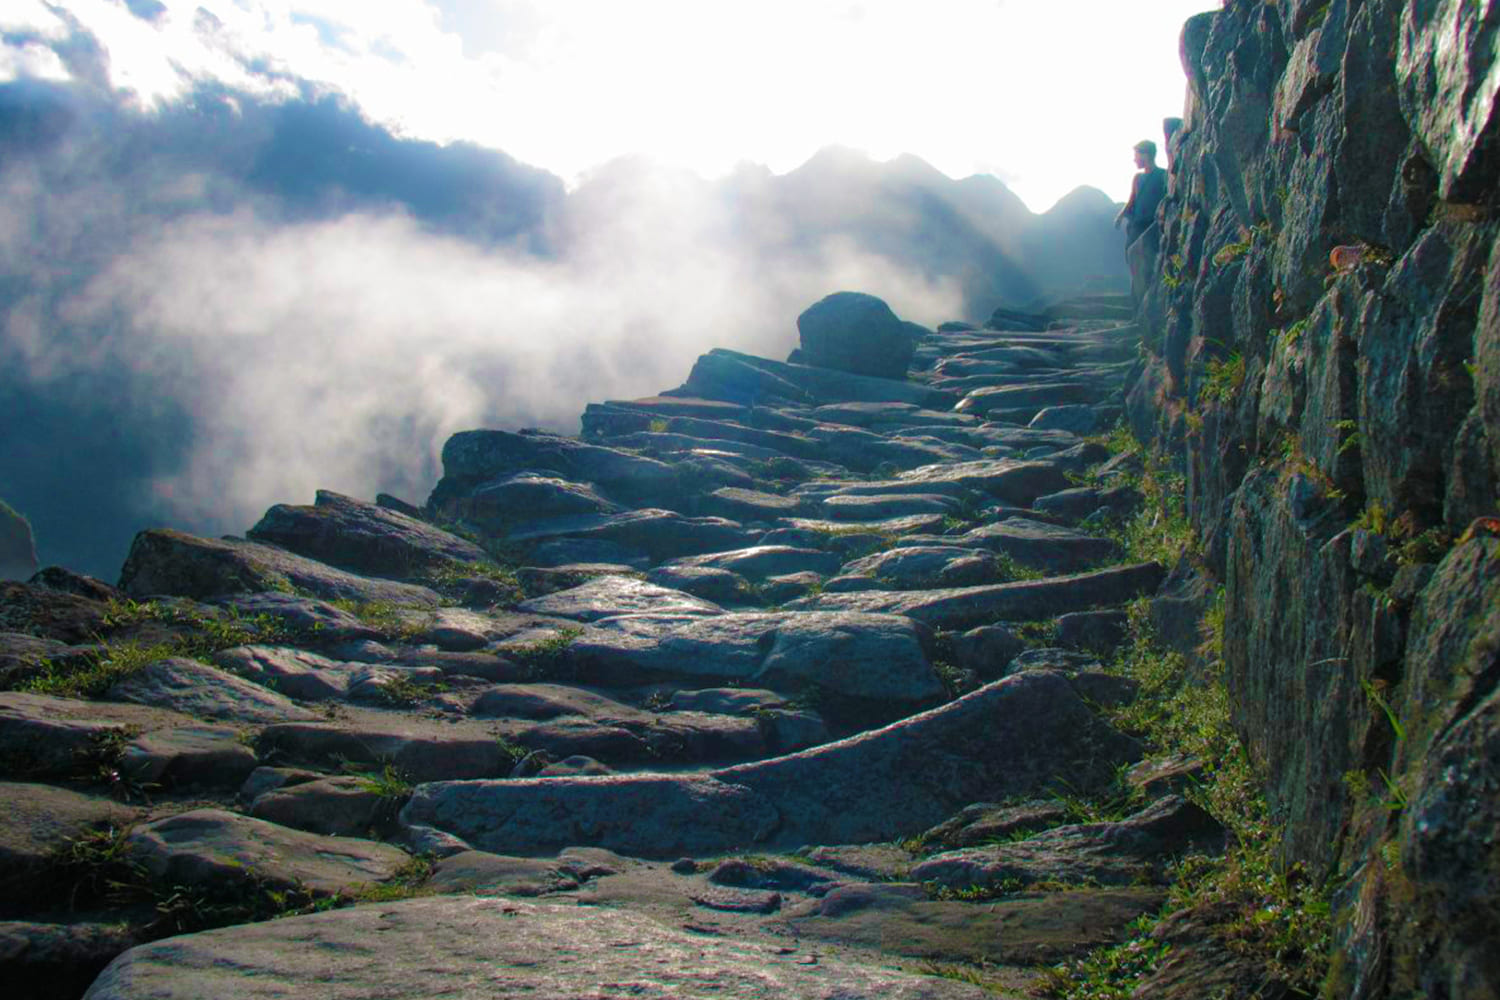 2.- WHERE IS THE INCA TRAIL?